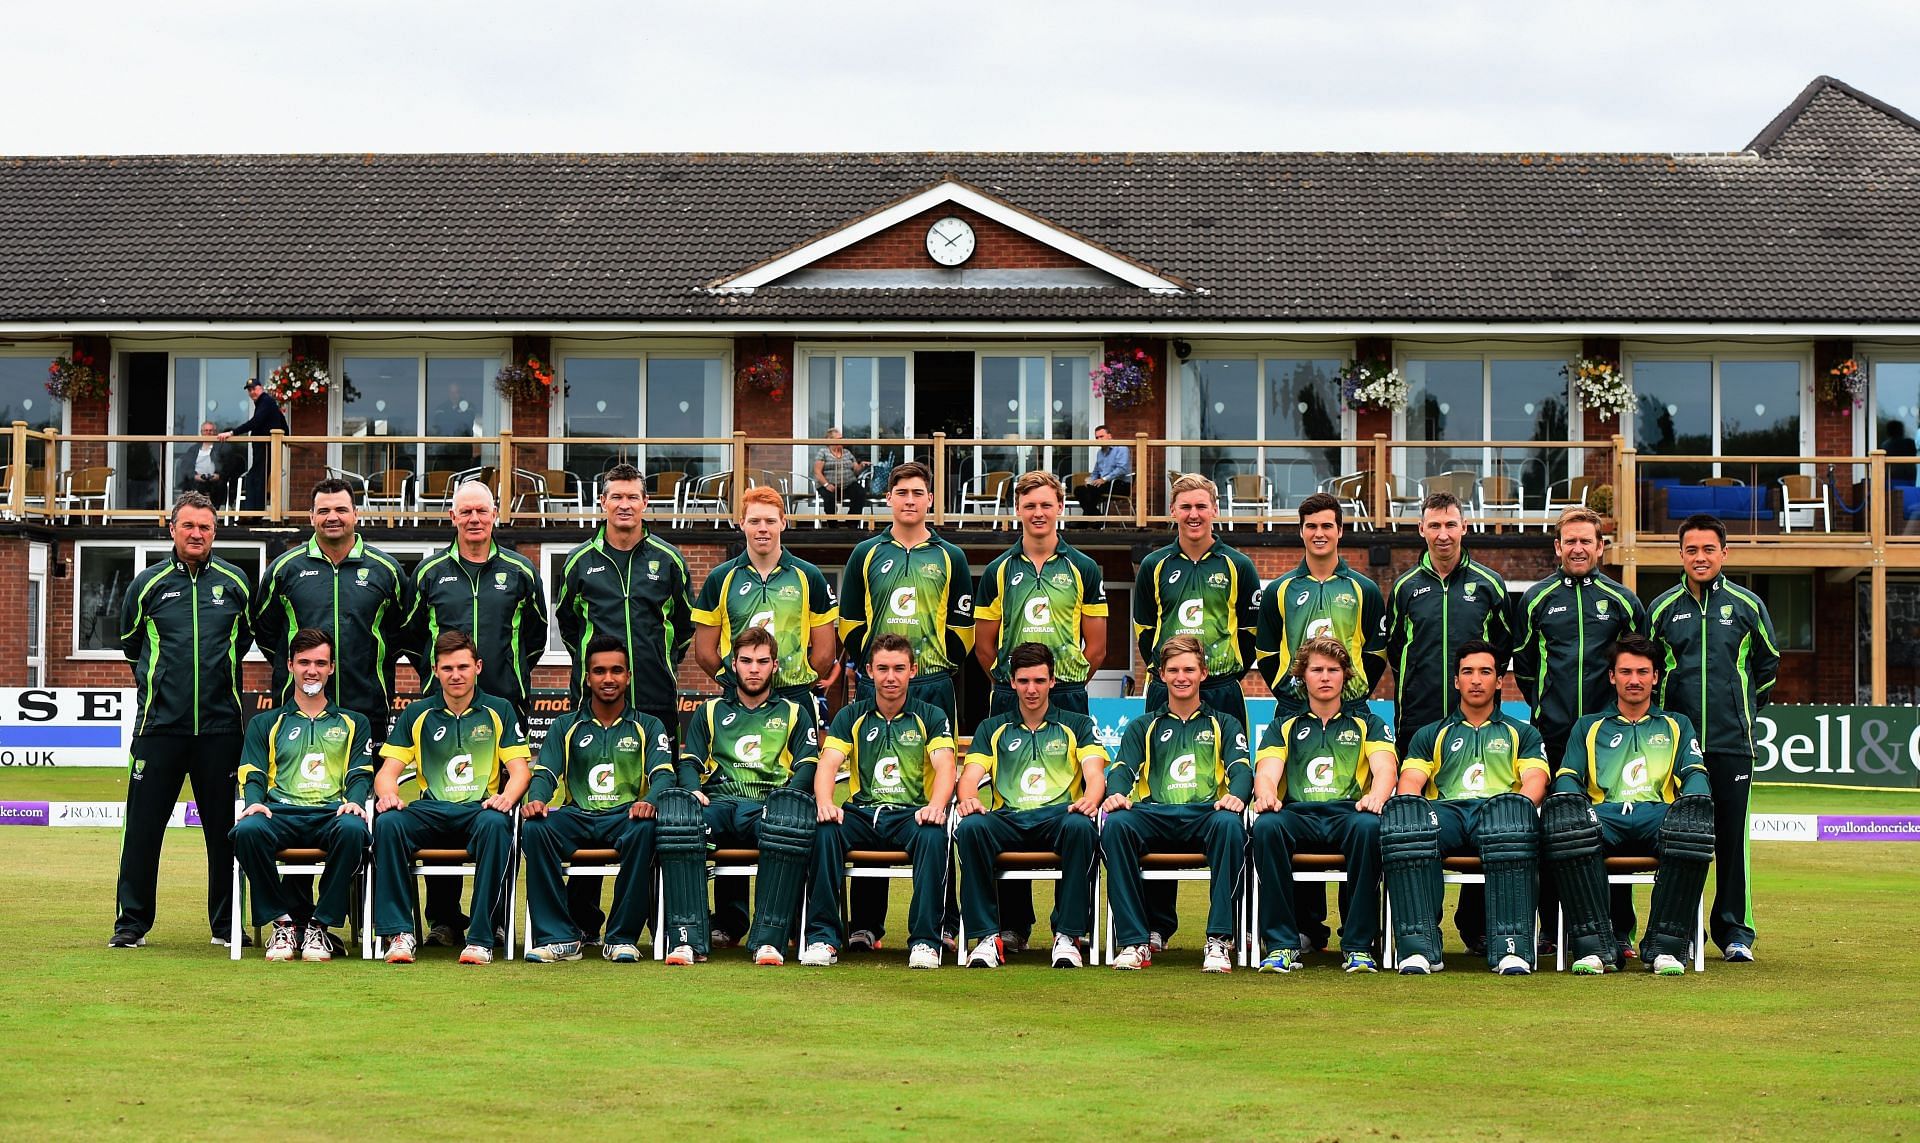 Australia U19 will be looking to secure a win against Scotland.